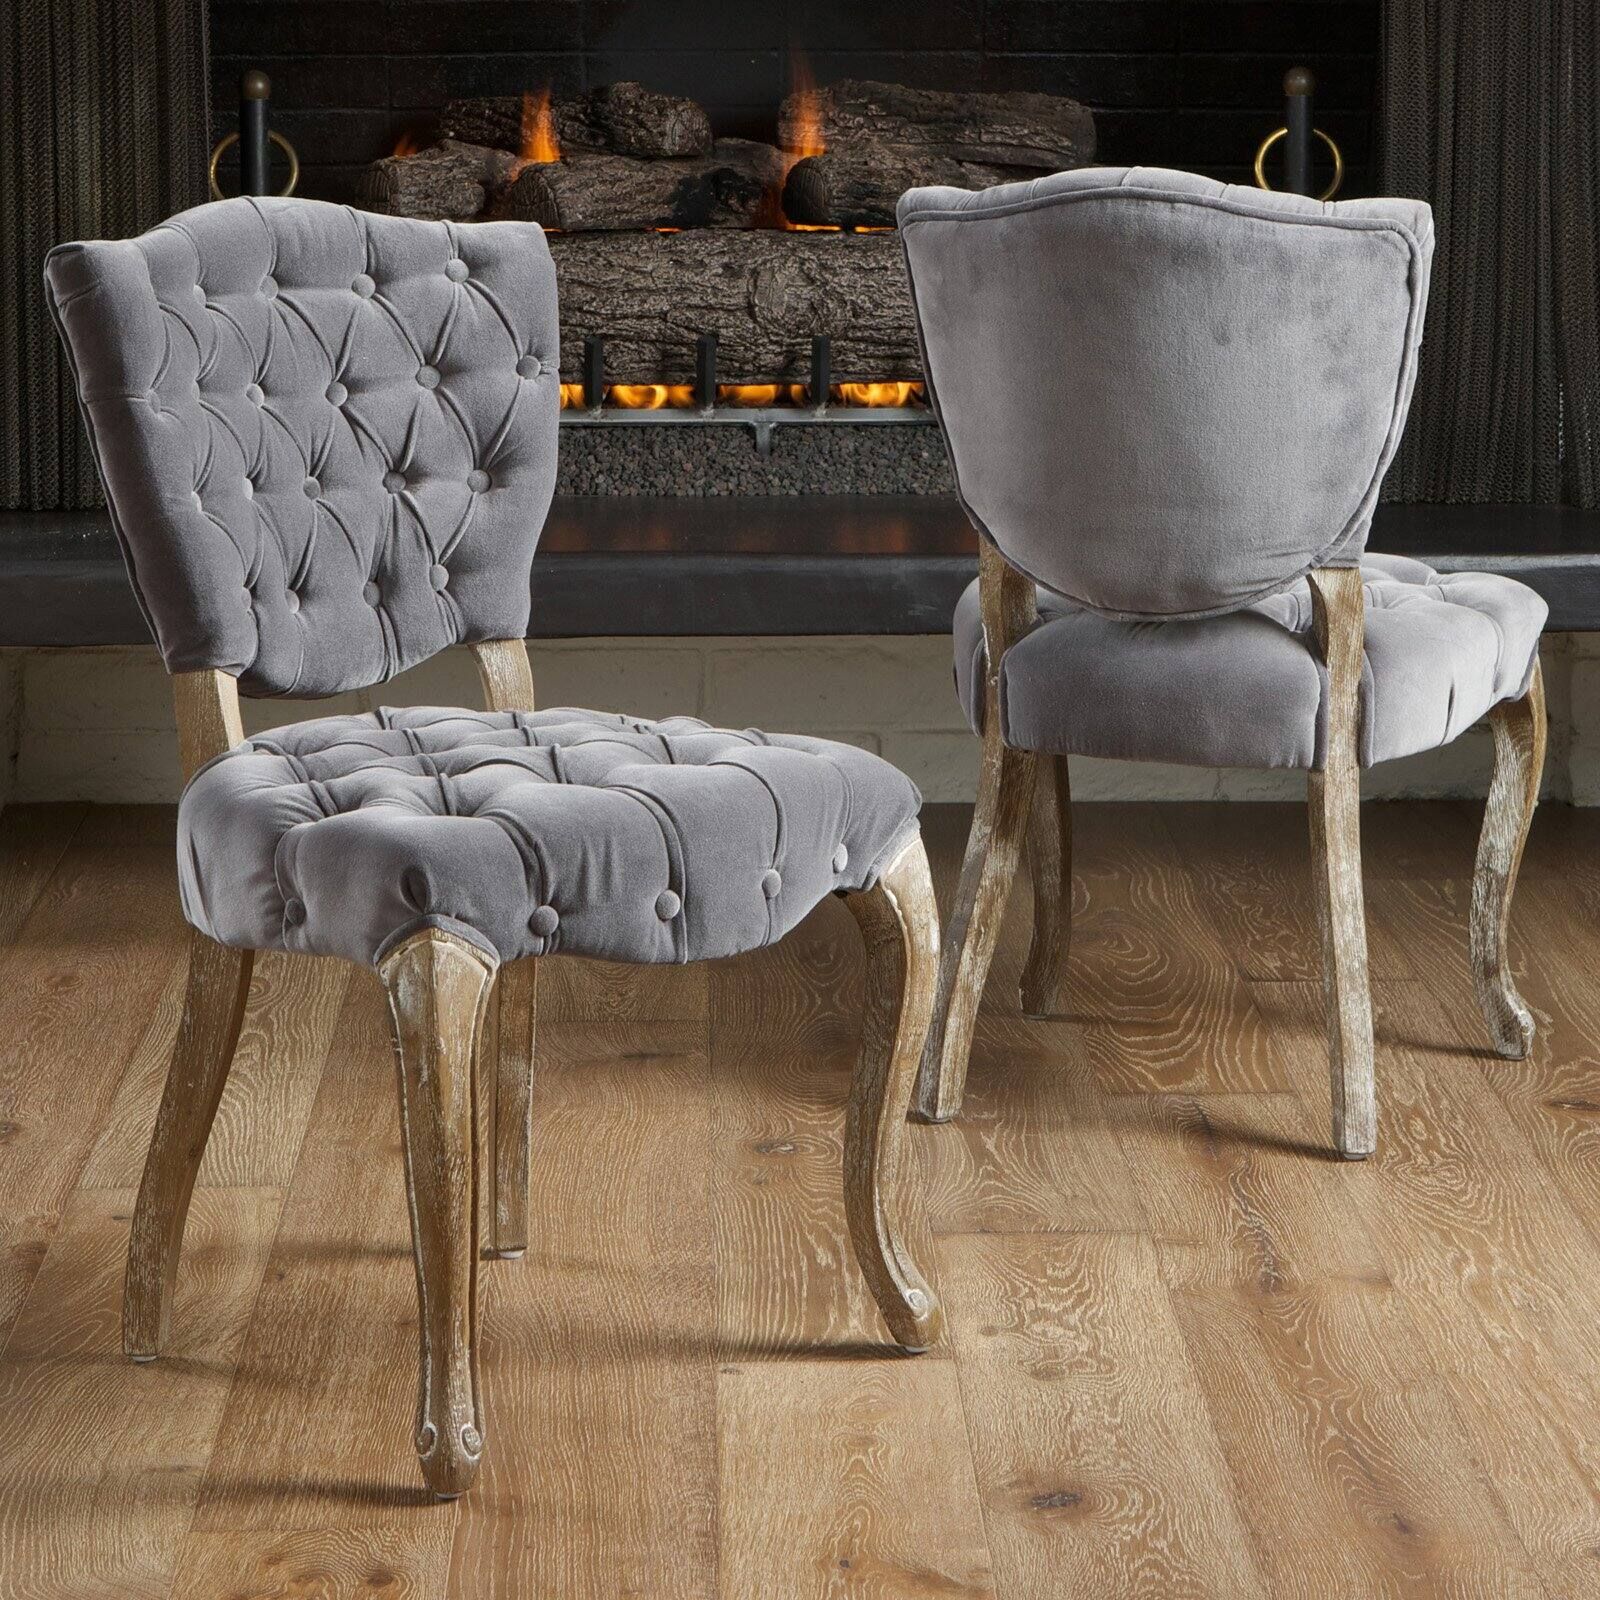 Middleton Tufted Grey Fabric Dining Chairs – 2 Pack – Walmart Regarding Gray Chenille Fabric Accent Stools (View 17 of 20)